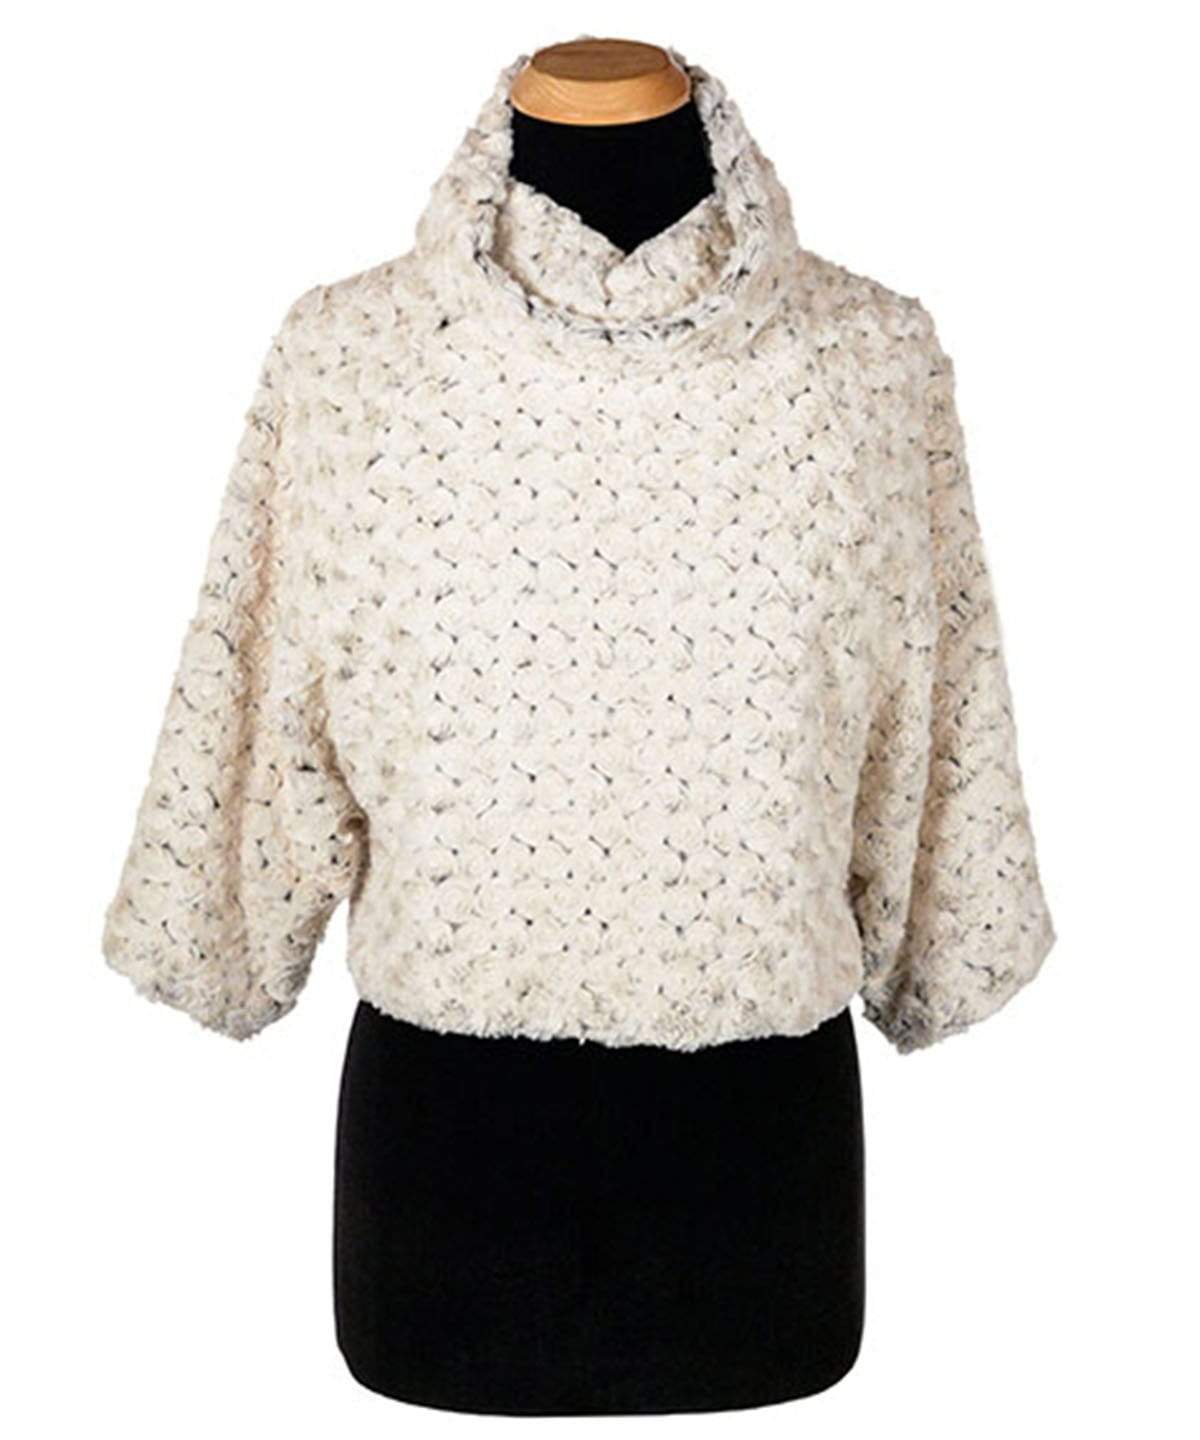 Sweater Top - Rosebud Faux Fur - Sold Out!